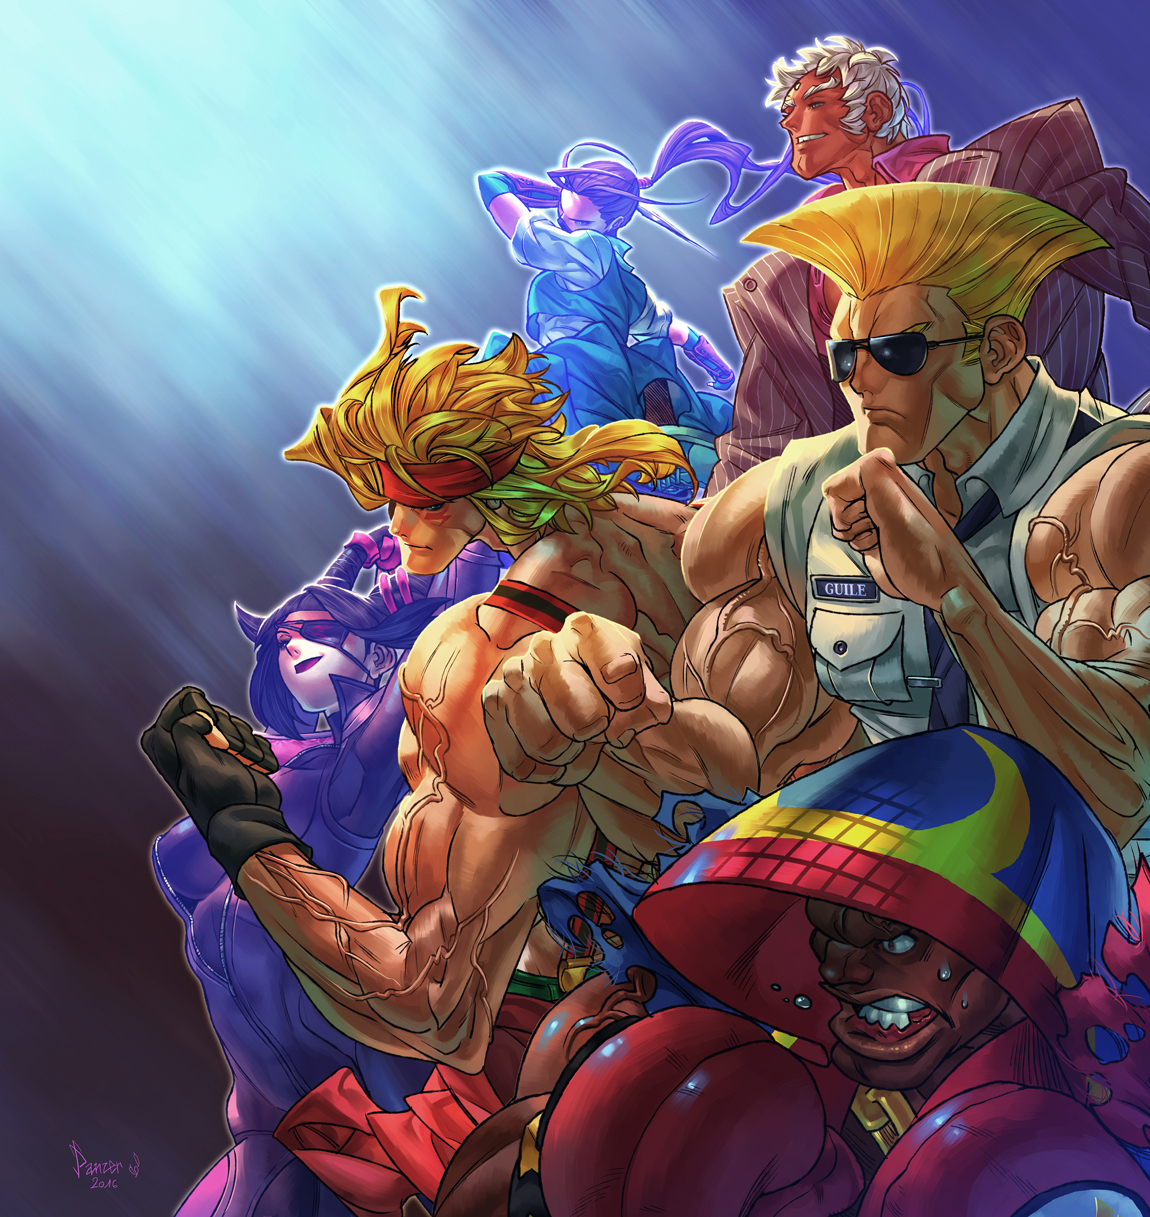 Street Fighter 5 characters could include Urien, Alex, Guile